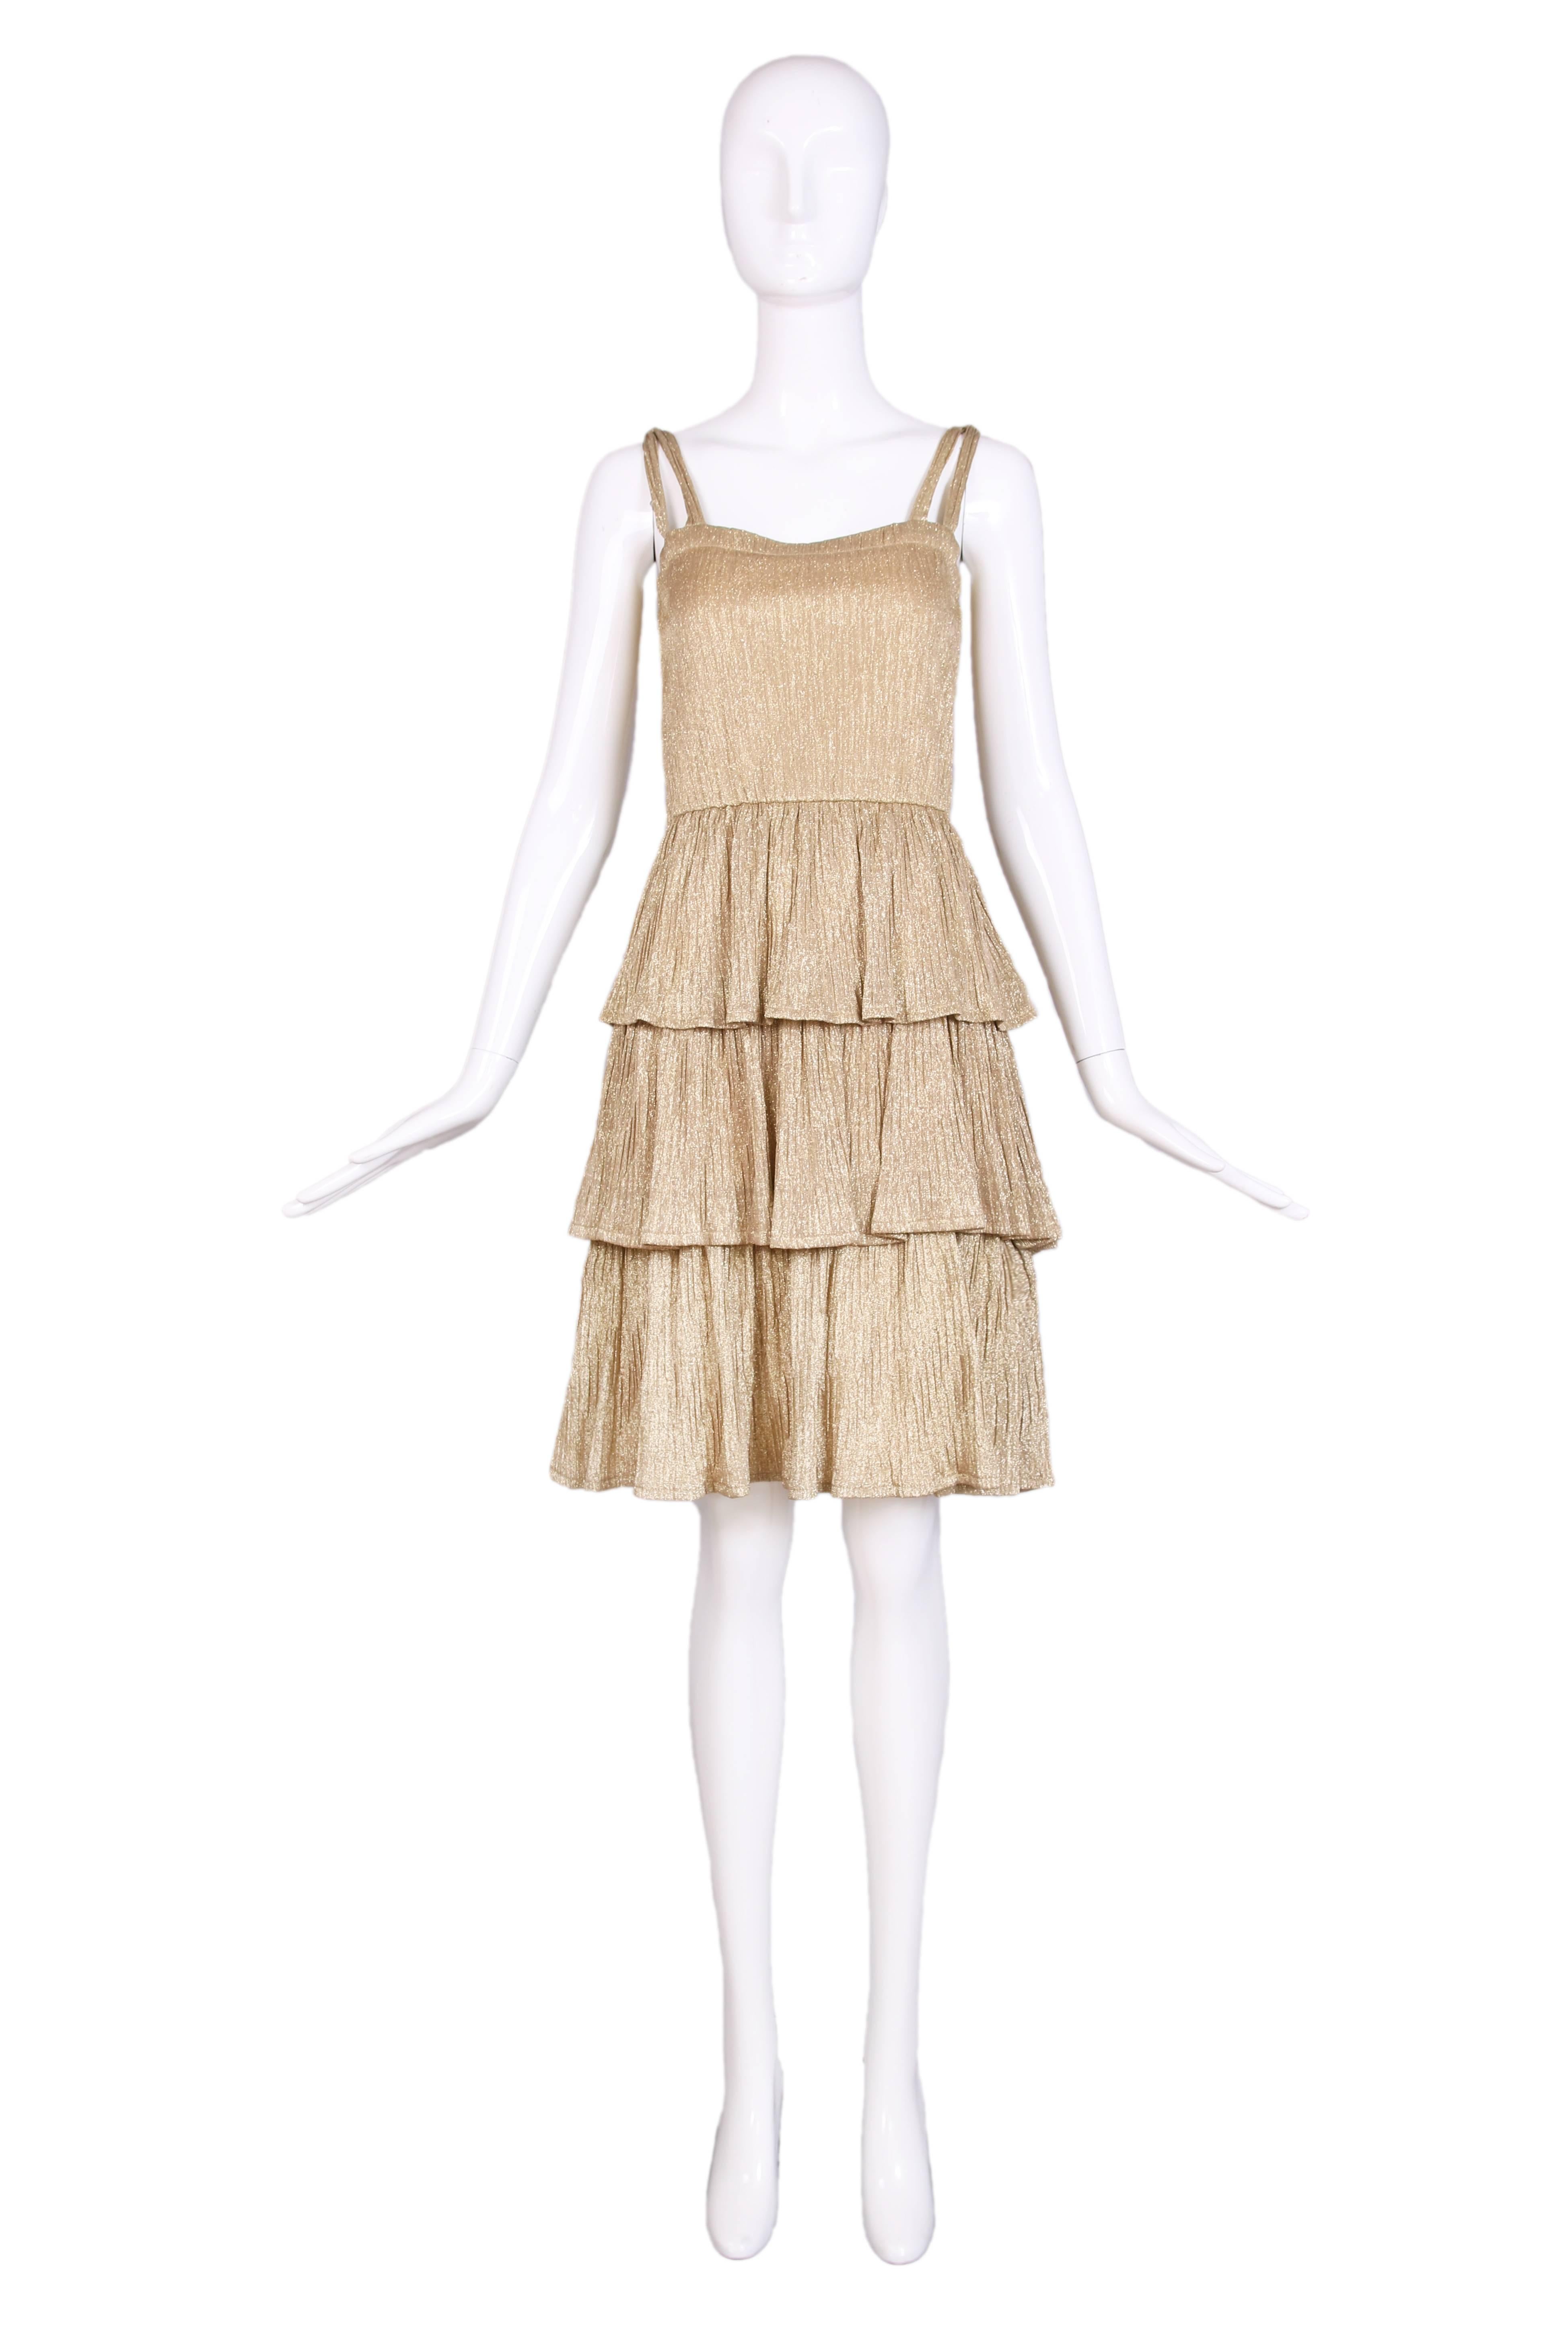 1970's gold lurex multi-tiered pleated party dress. Elastic waist and double straps that connect at the top of the shoulder. In excellent condition. No size tag, please consult measurements.
MEASUREMENTS:
Bust - 32